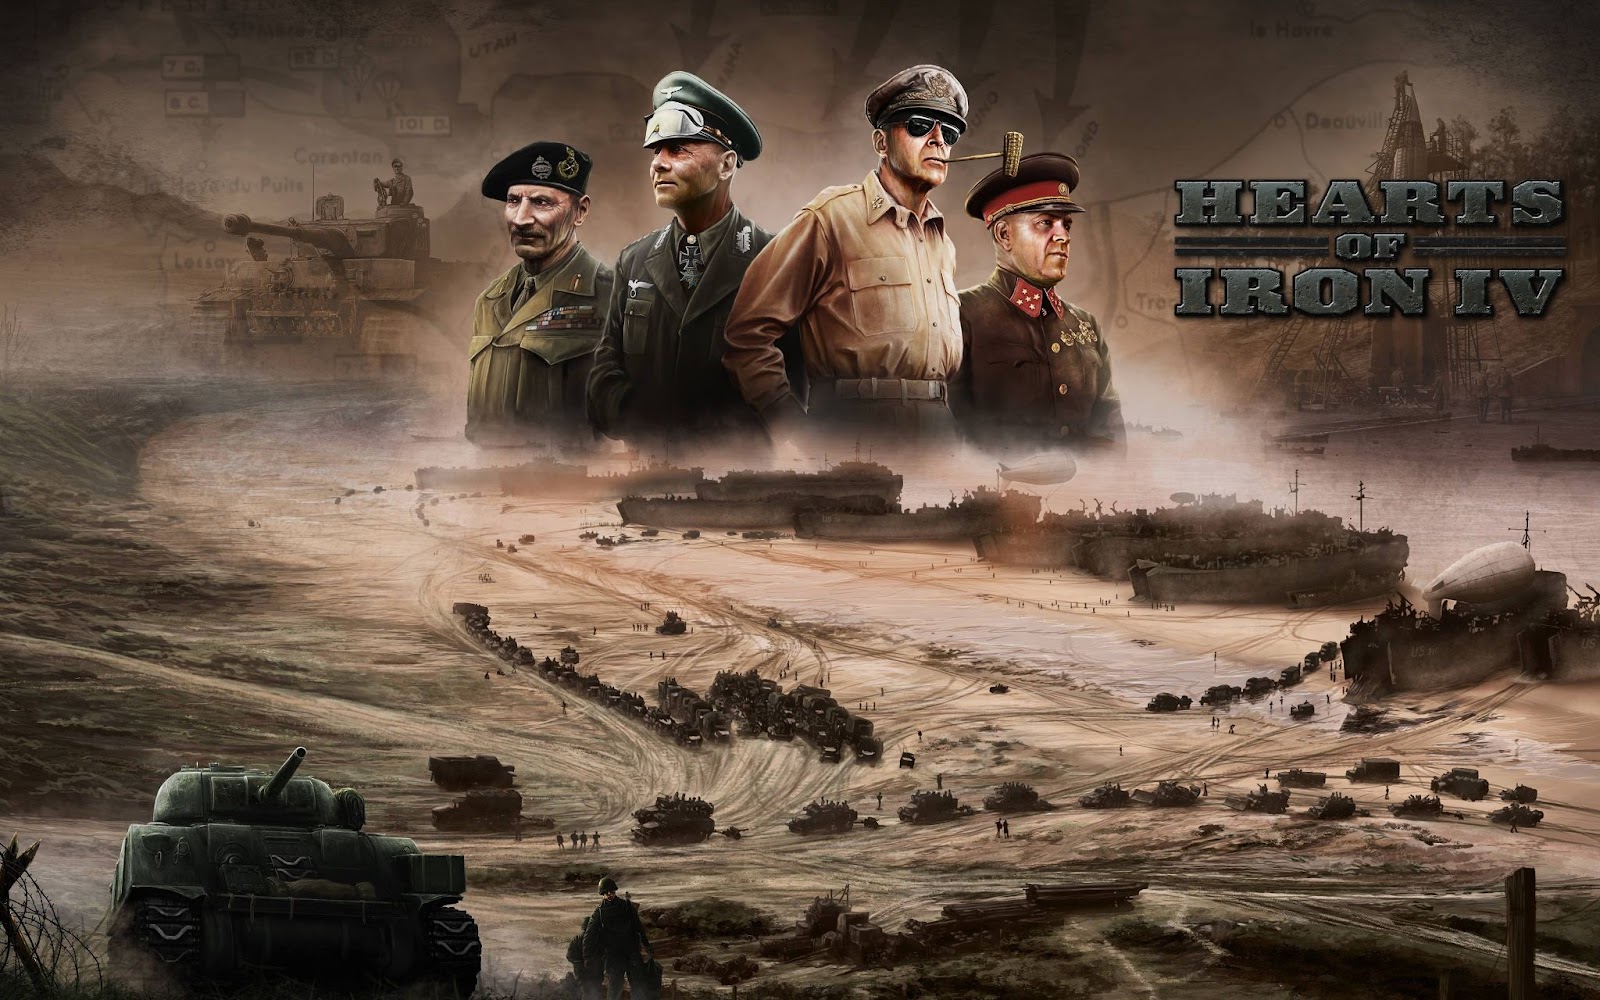  Hearts of Iron IV By KUBET